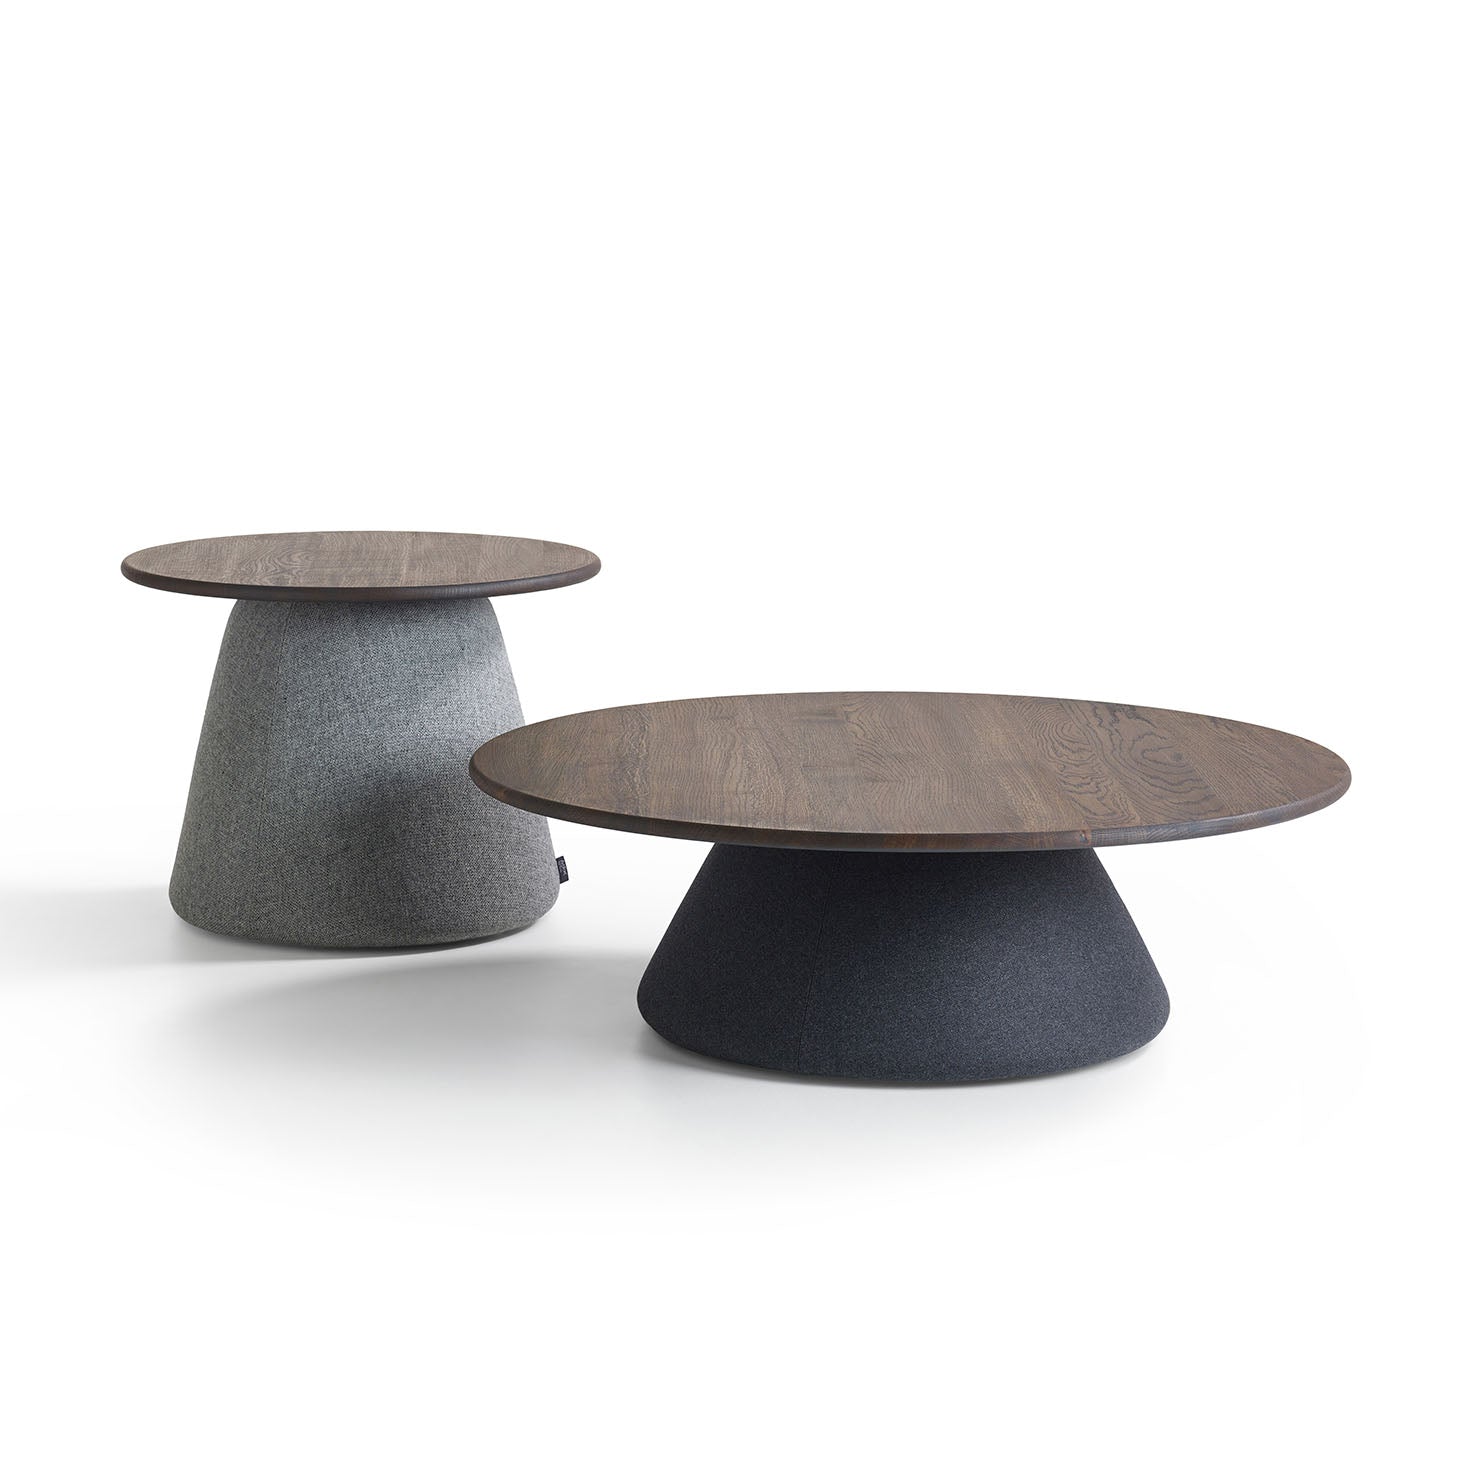 Terp tables and stools